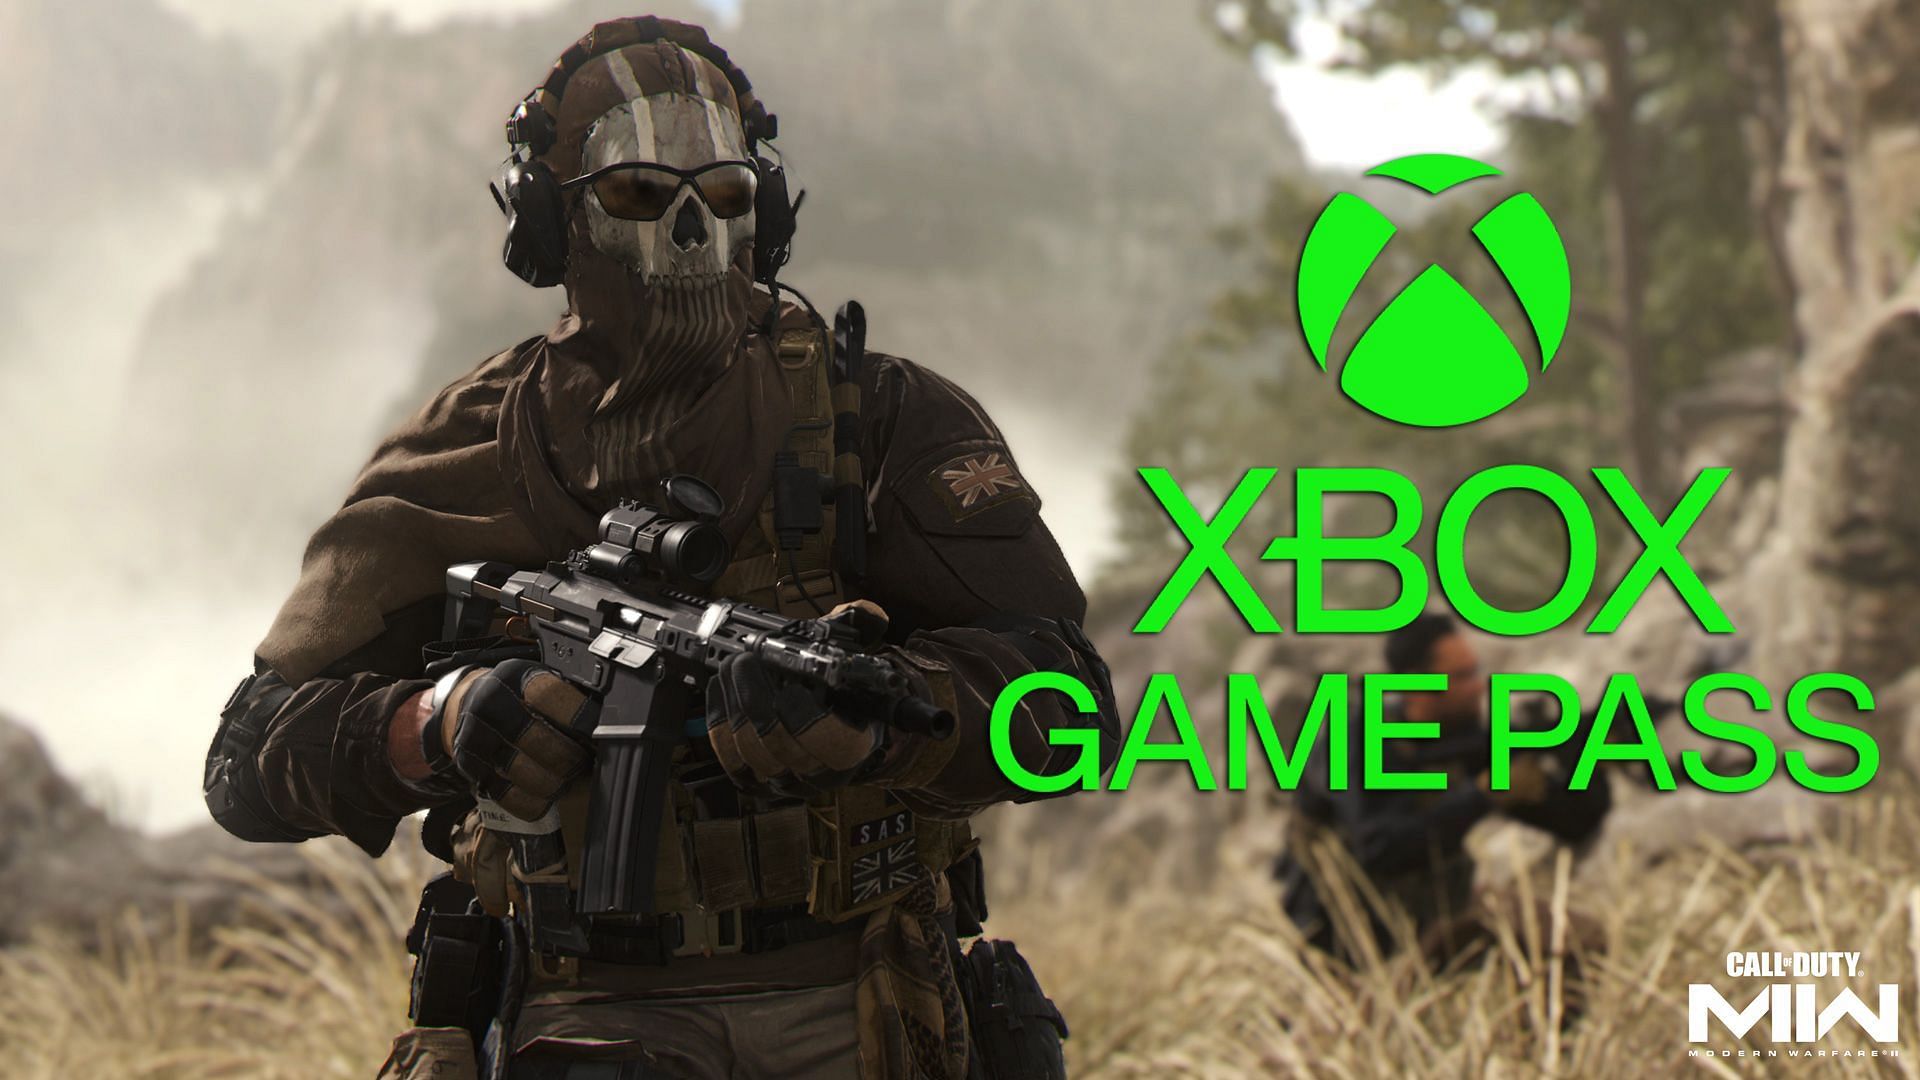 With Call of Duty games confirmed for Xbox Game Pass, what does it mean